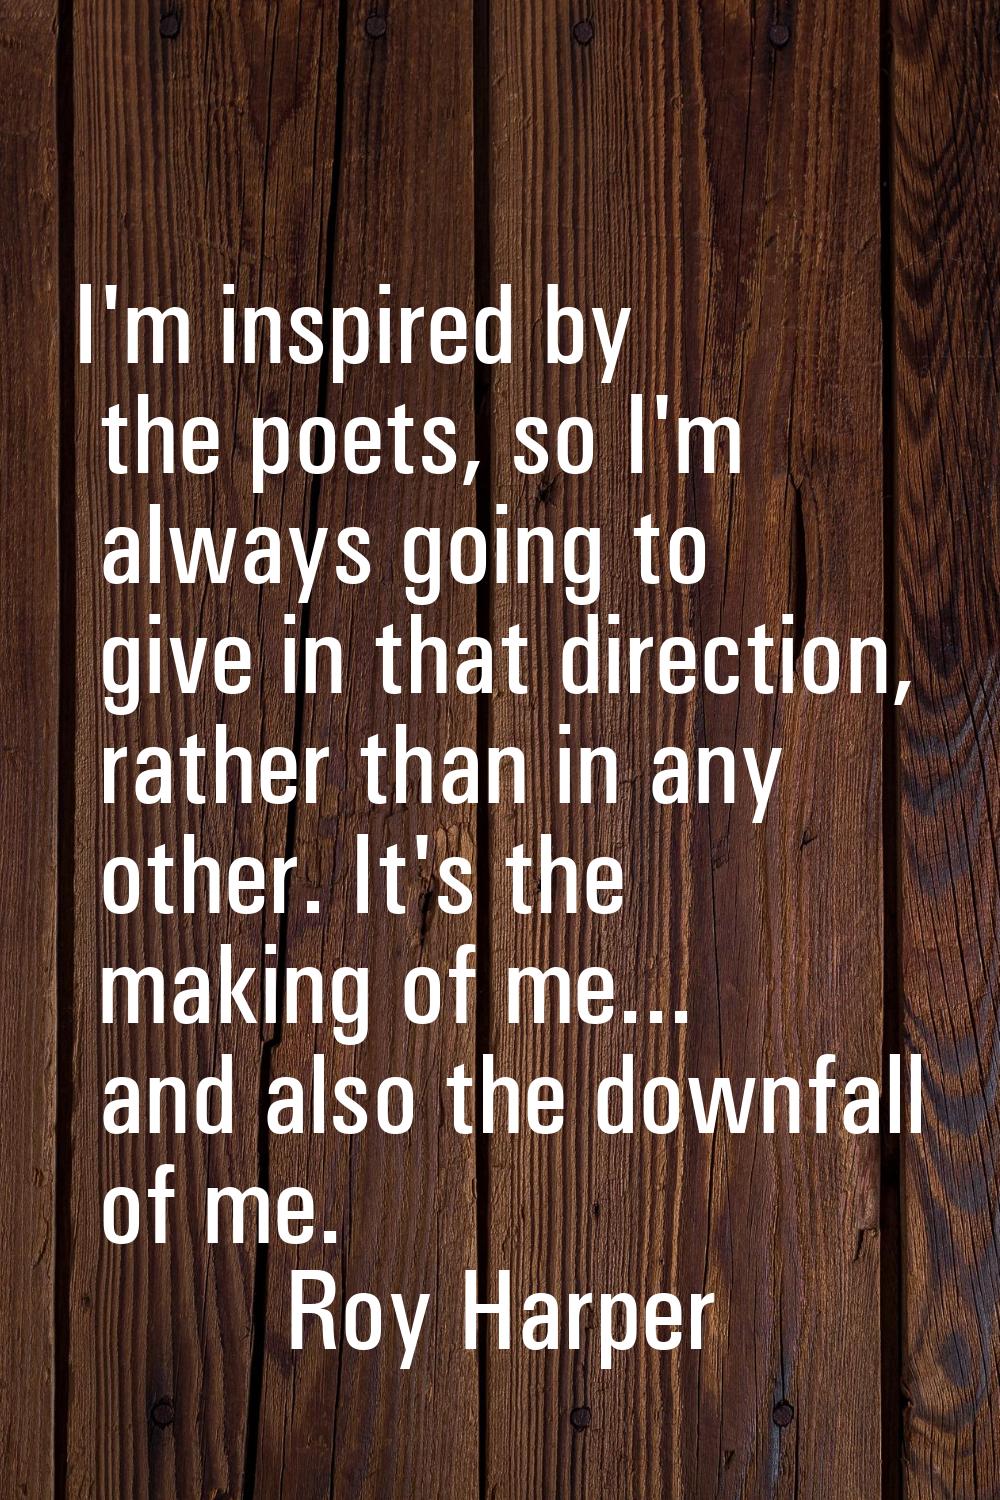 I'm inspired by the poets, so I'm always going to give in that direction, rather than in any other.